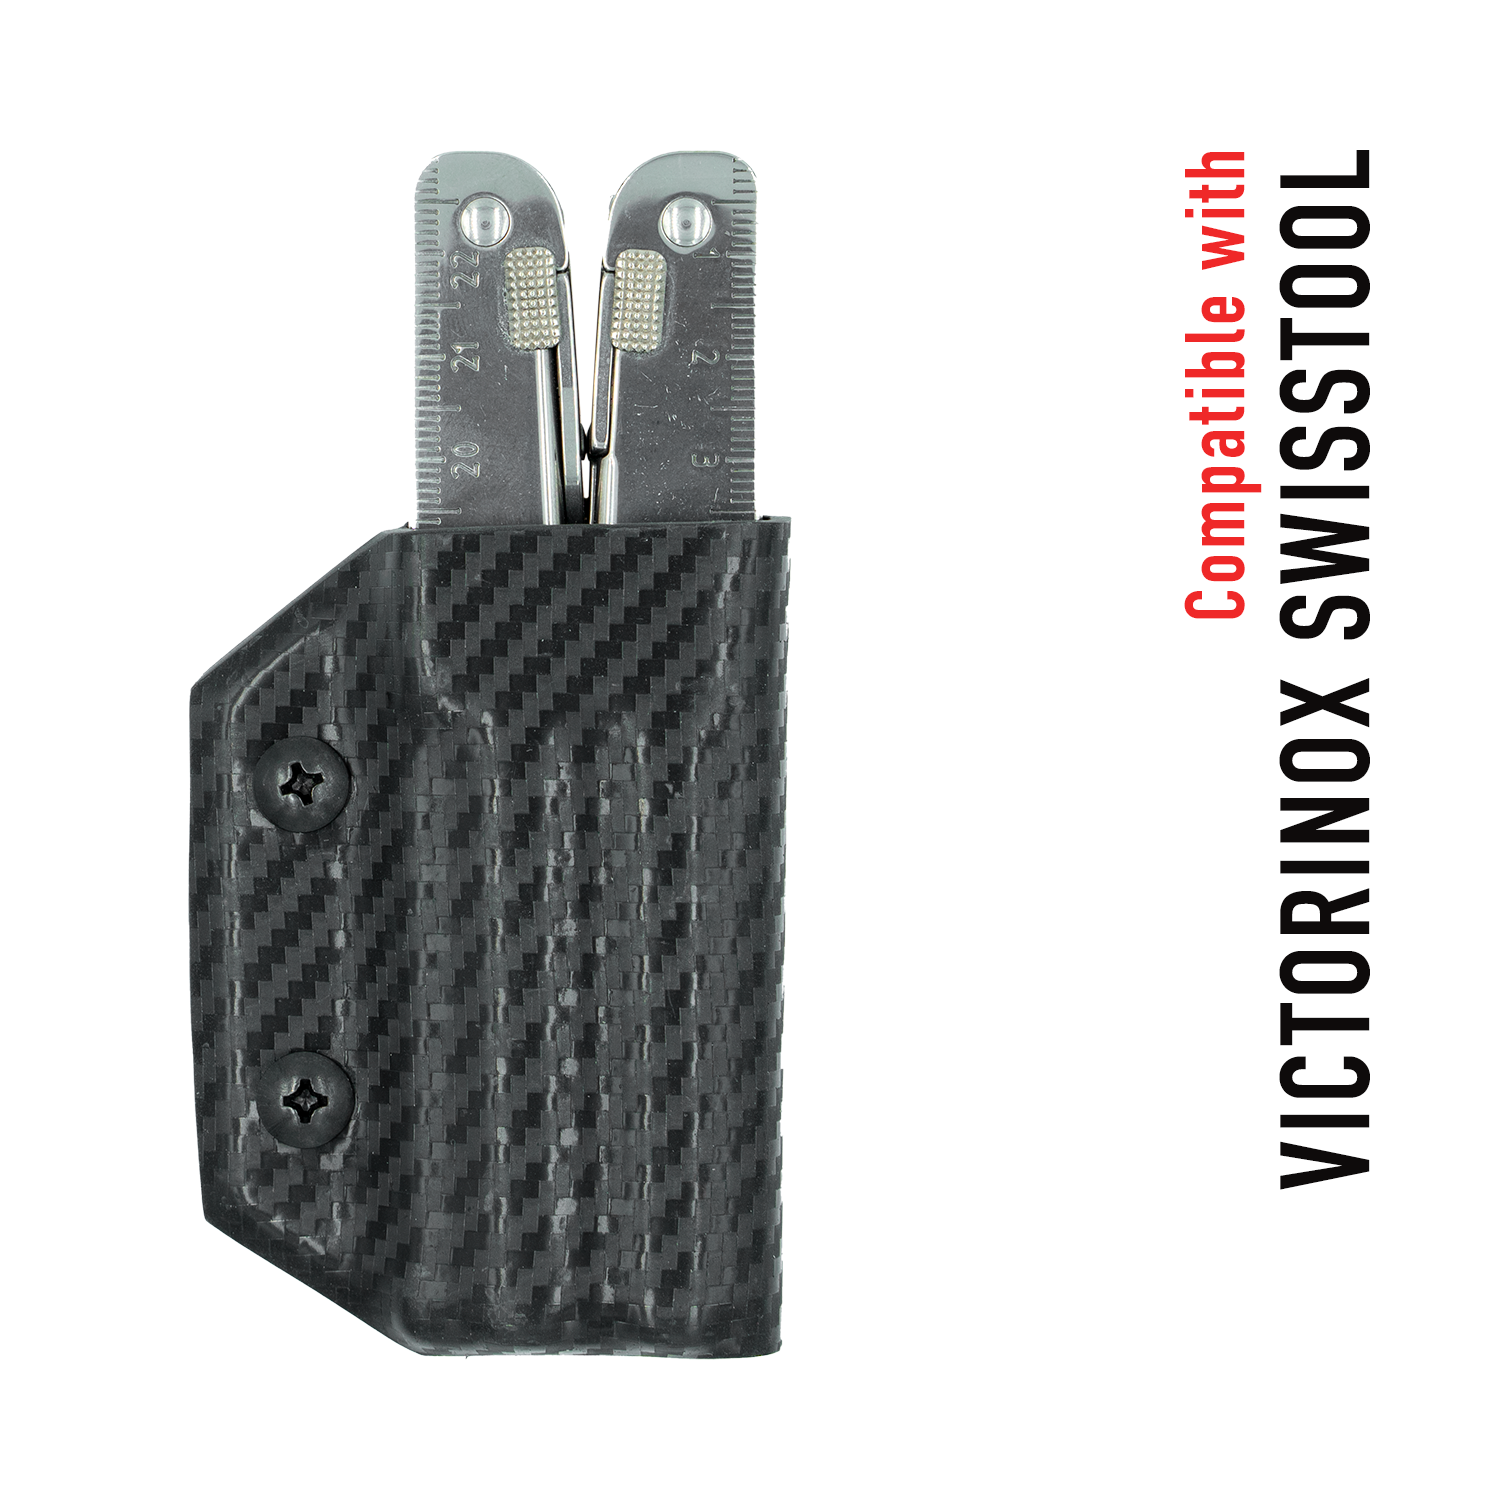 Kydex Sheath ONLY for 3.25 Inch Victorinox Paring Knife knife Not Included  Model-specific 